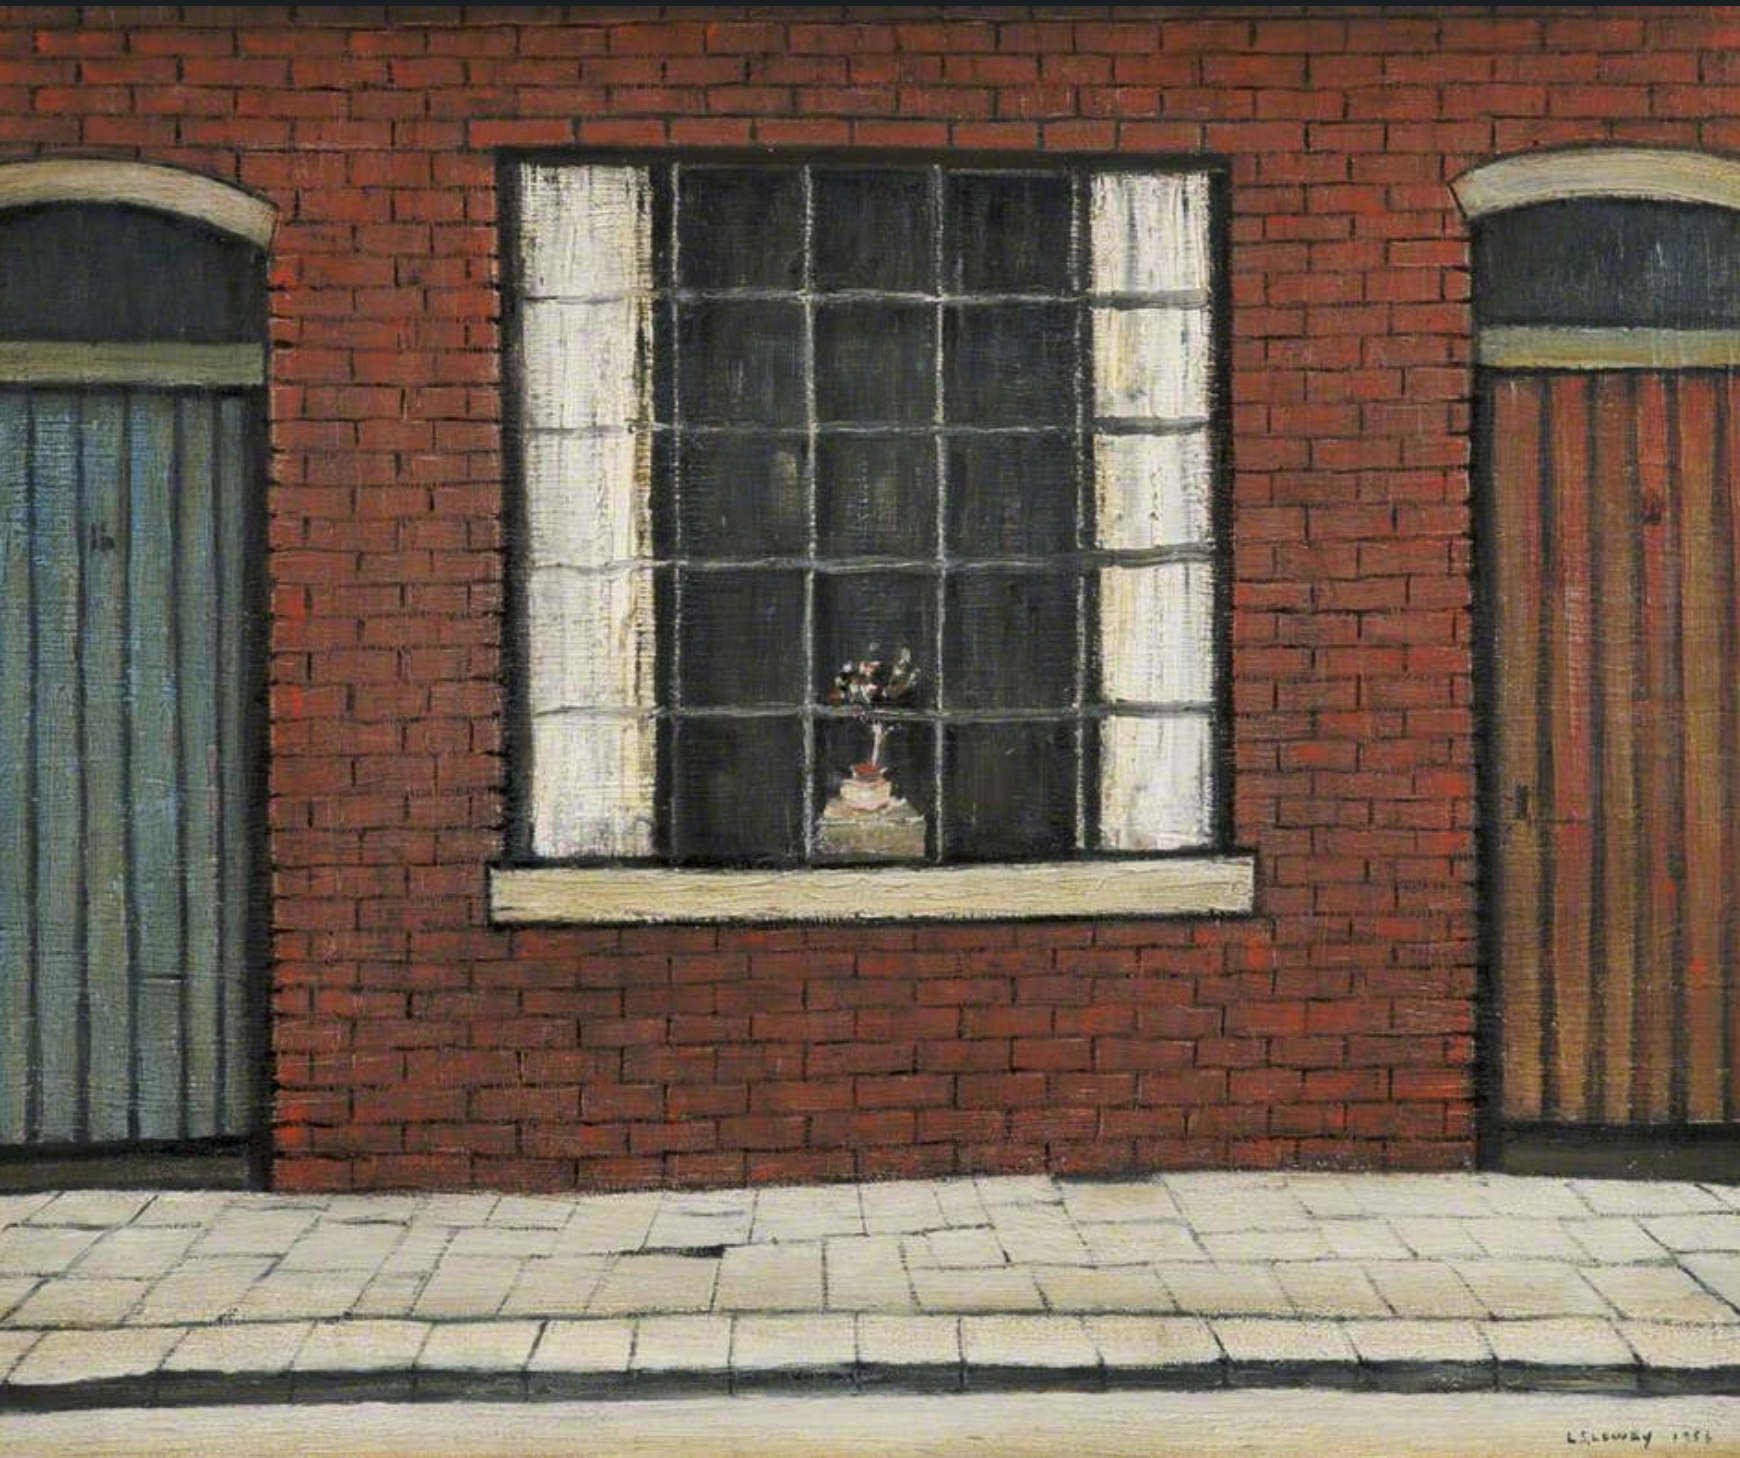 Flowers in a window (1956) by Laurence Stephen Lowry (1887 - 1976), English artist.